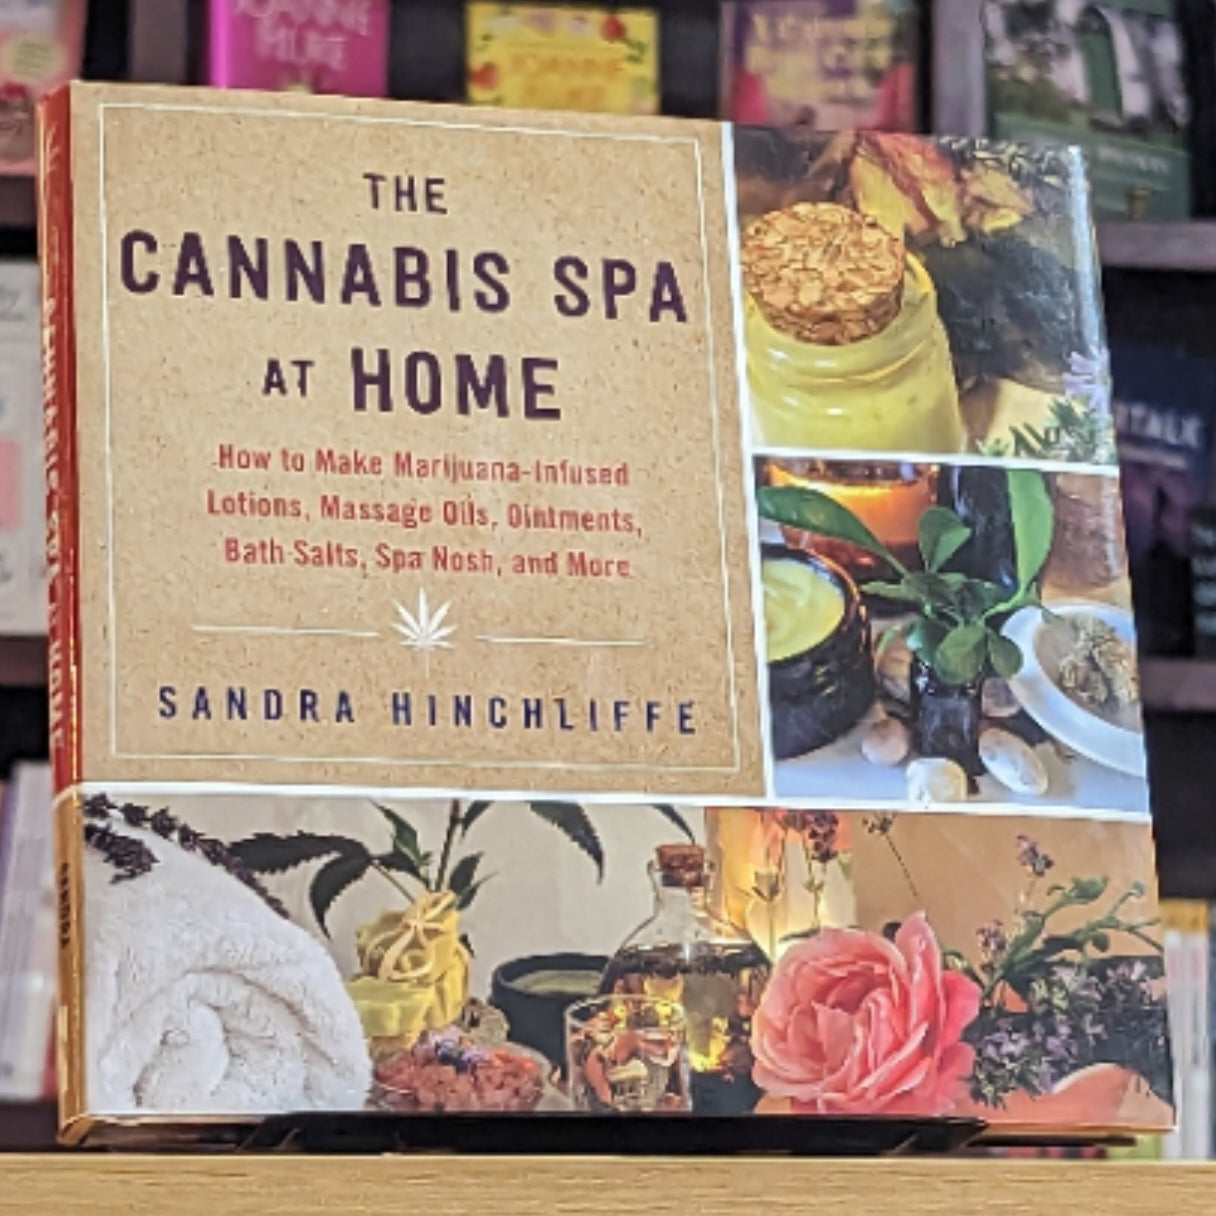 The Cannabis Spa at Home: How to Make Marijuana-Infused Lotions, Massage Oils, Ointments, Bath Salts, Spa Nosh, and More